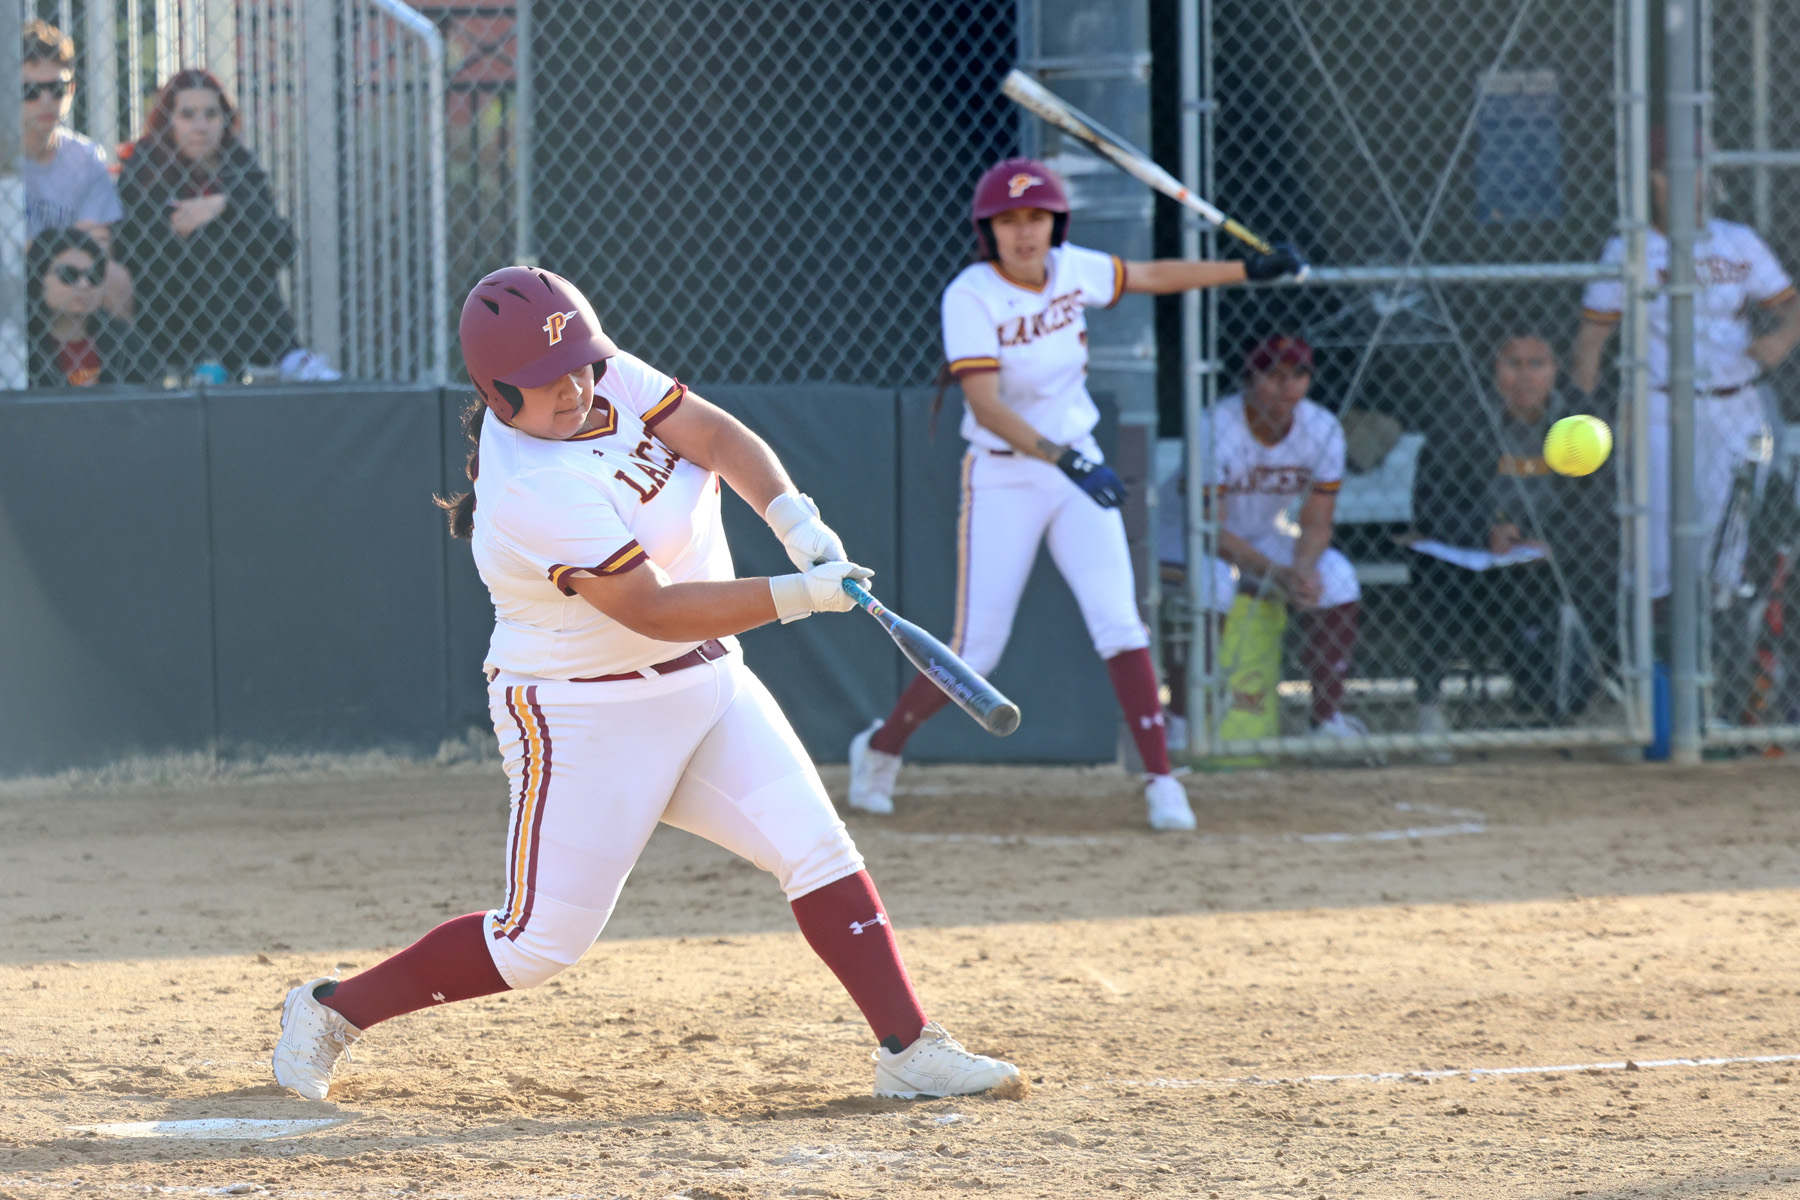 Monica Gutierrez with her second home run in as many games on Tuesday (photo by Richard Quinton).